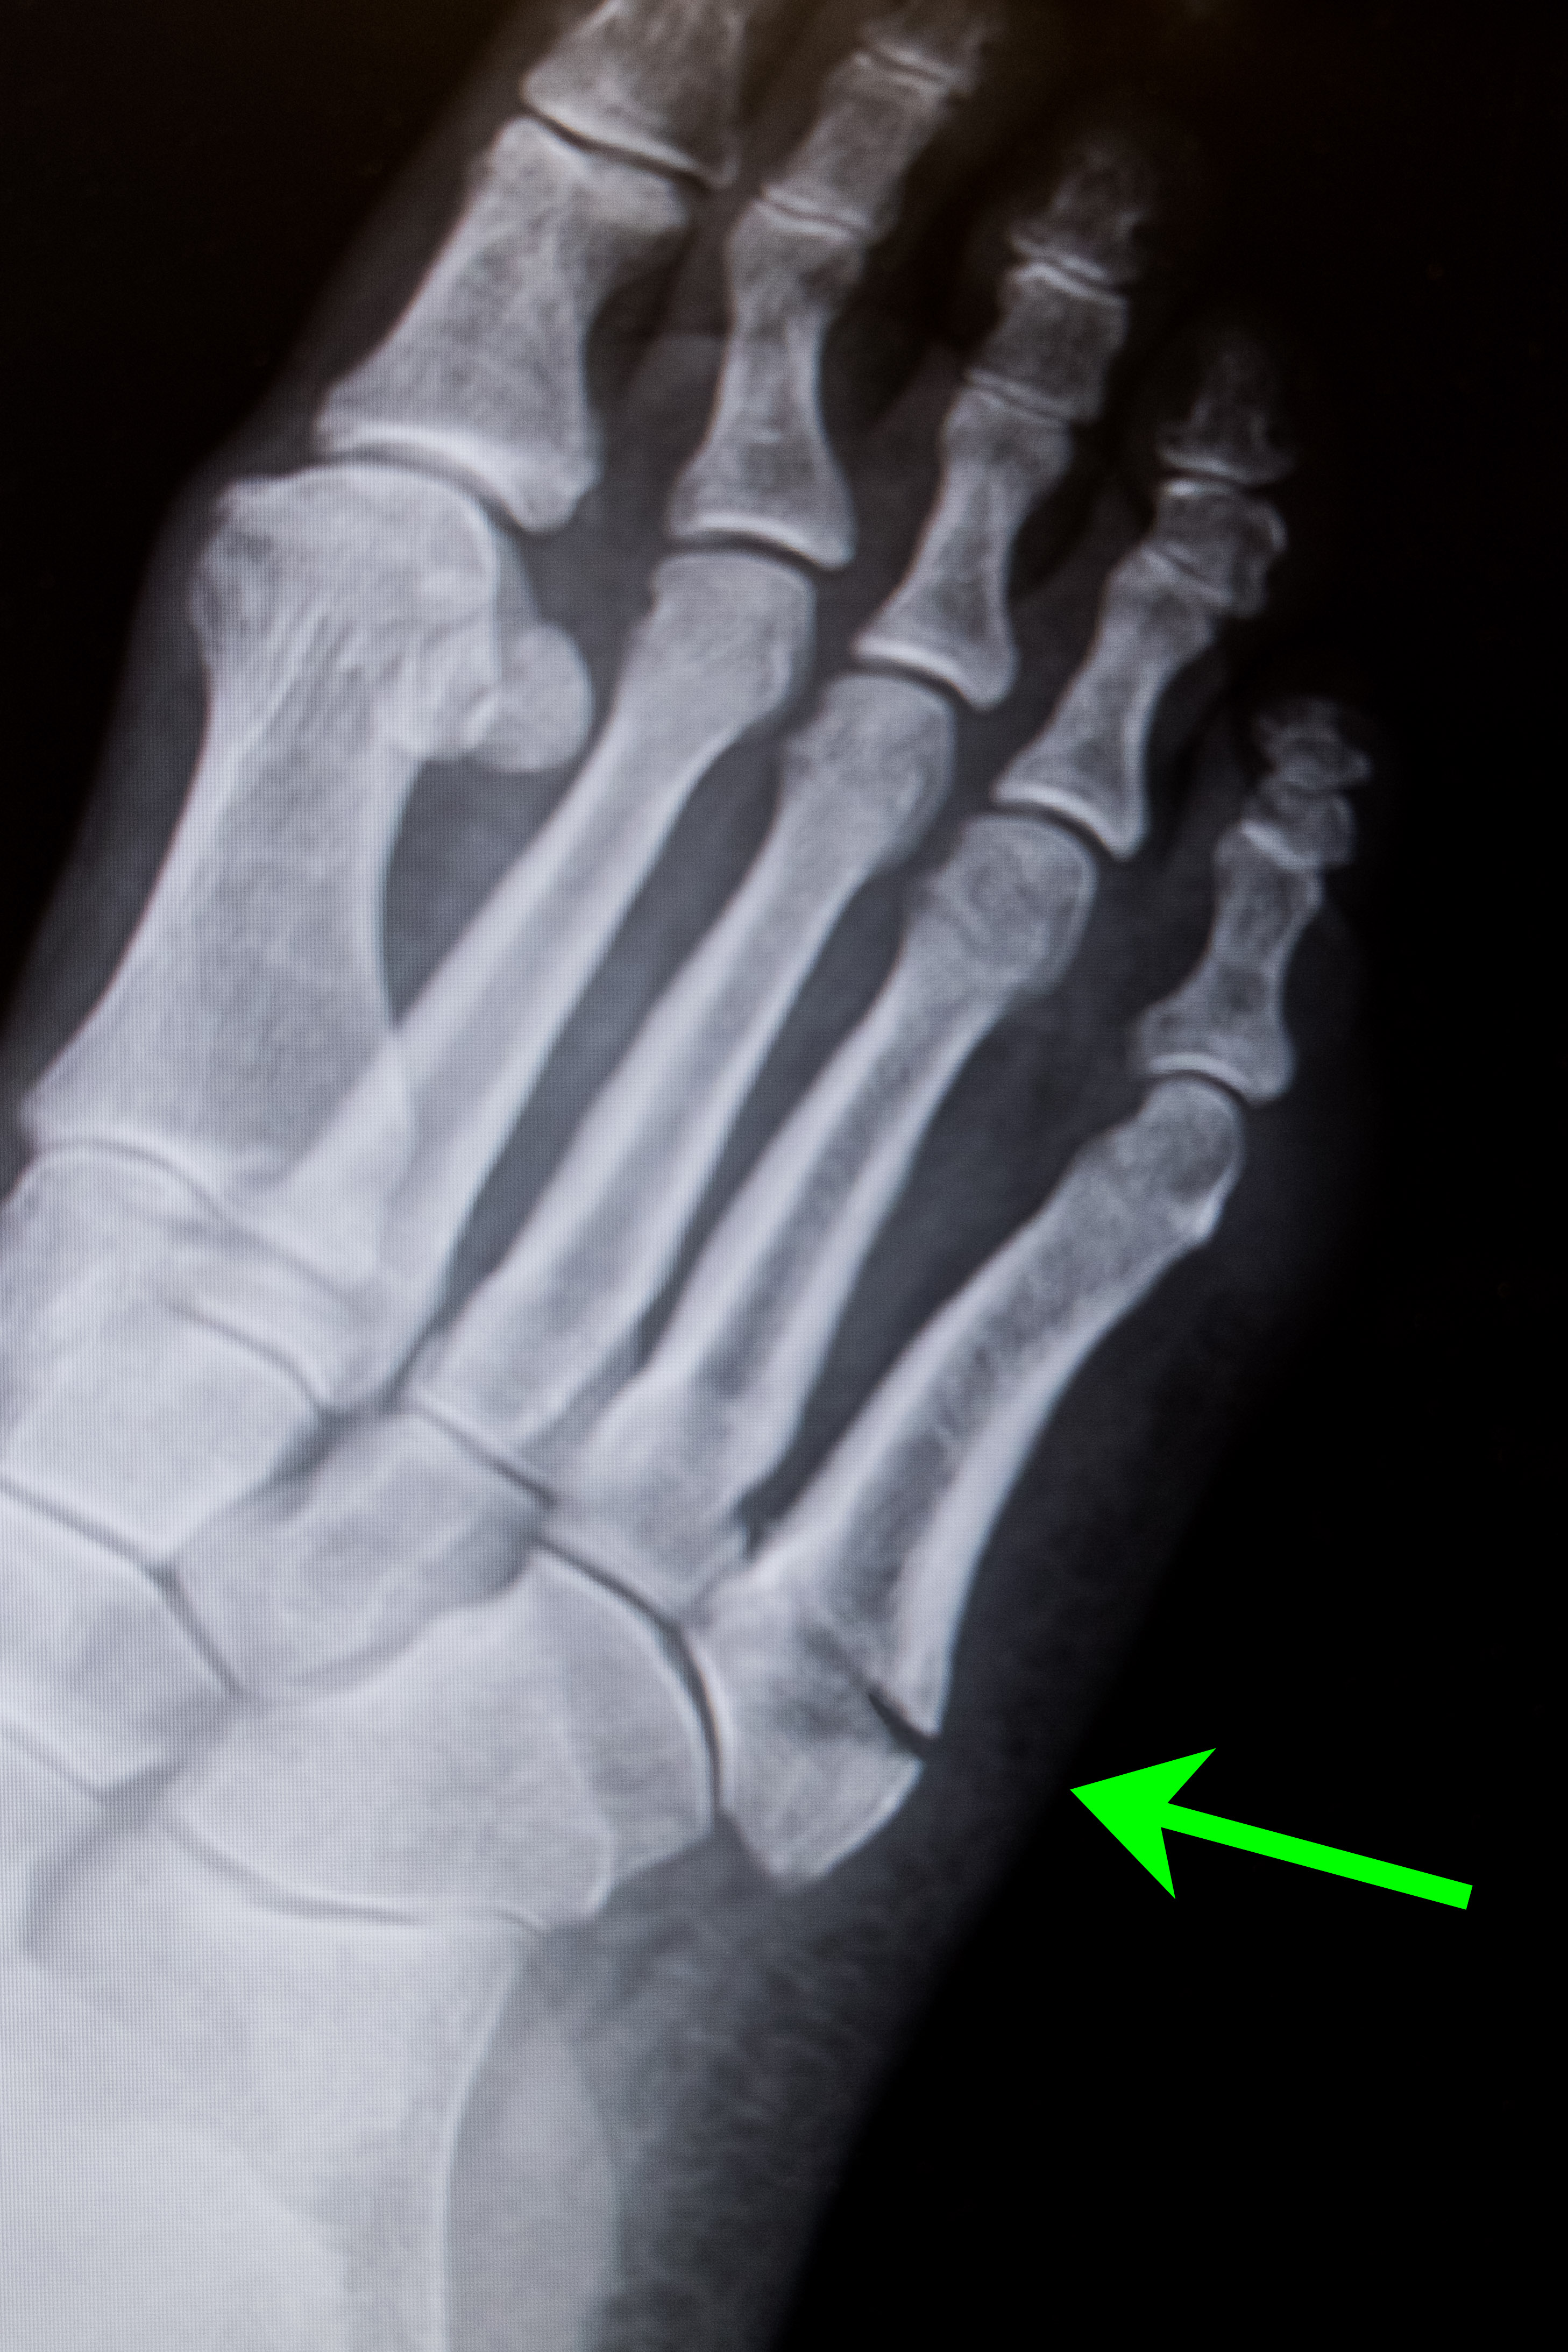 Foot Injury with Fracture - Friendly Footcare Inc.